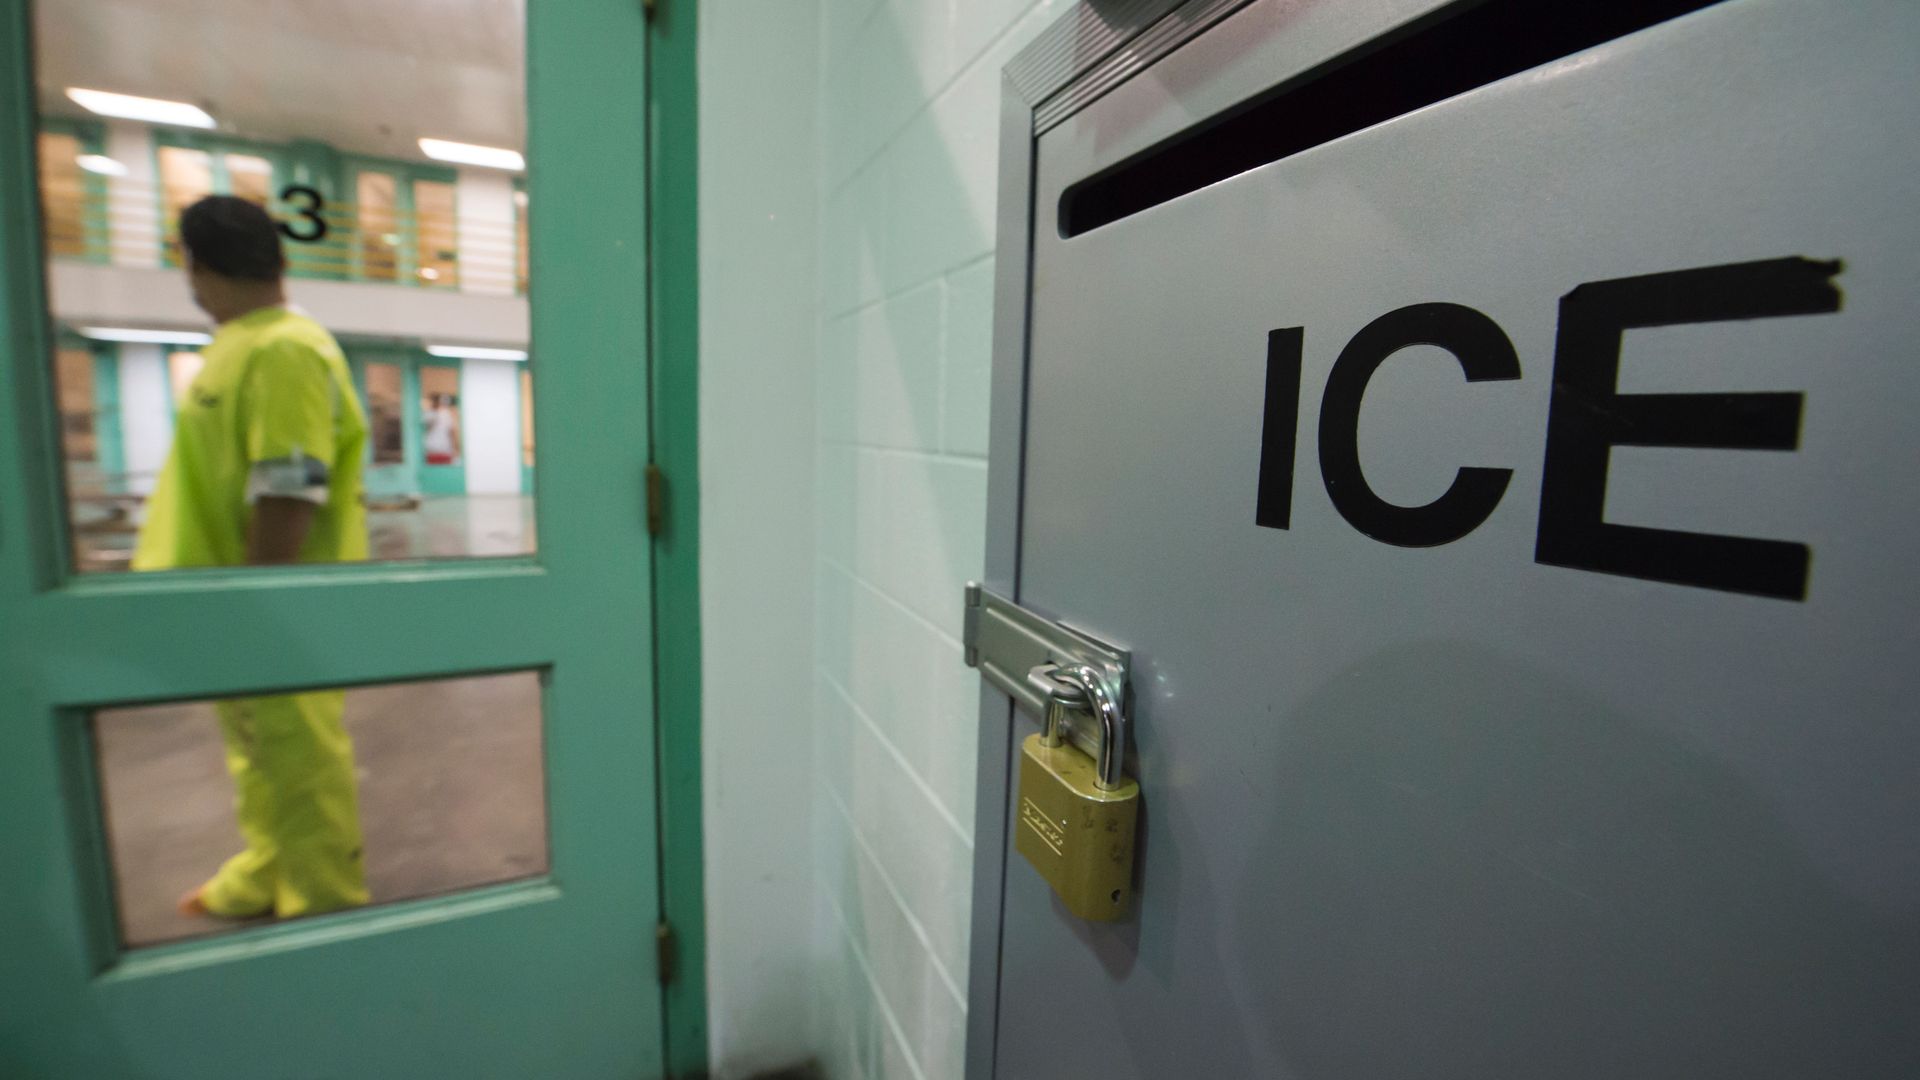 ICE holding facility in Orange COunty